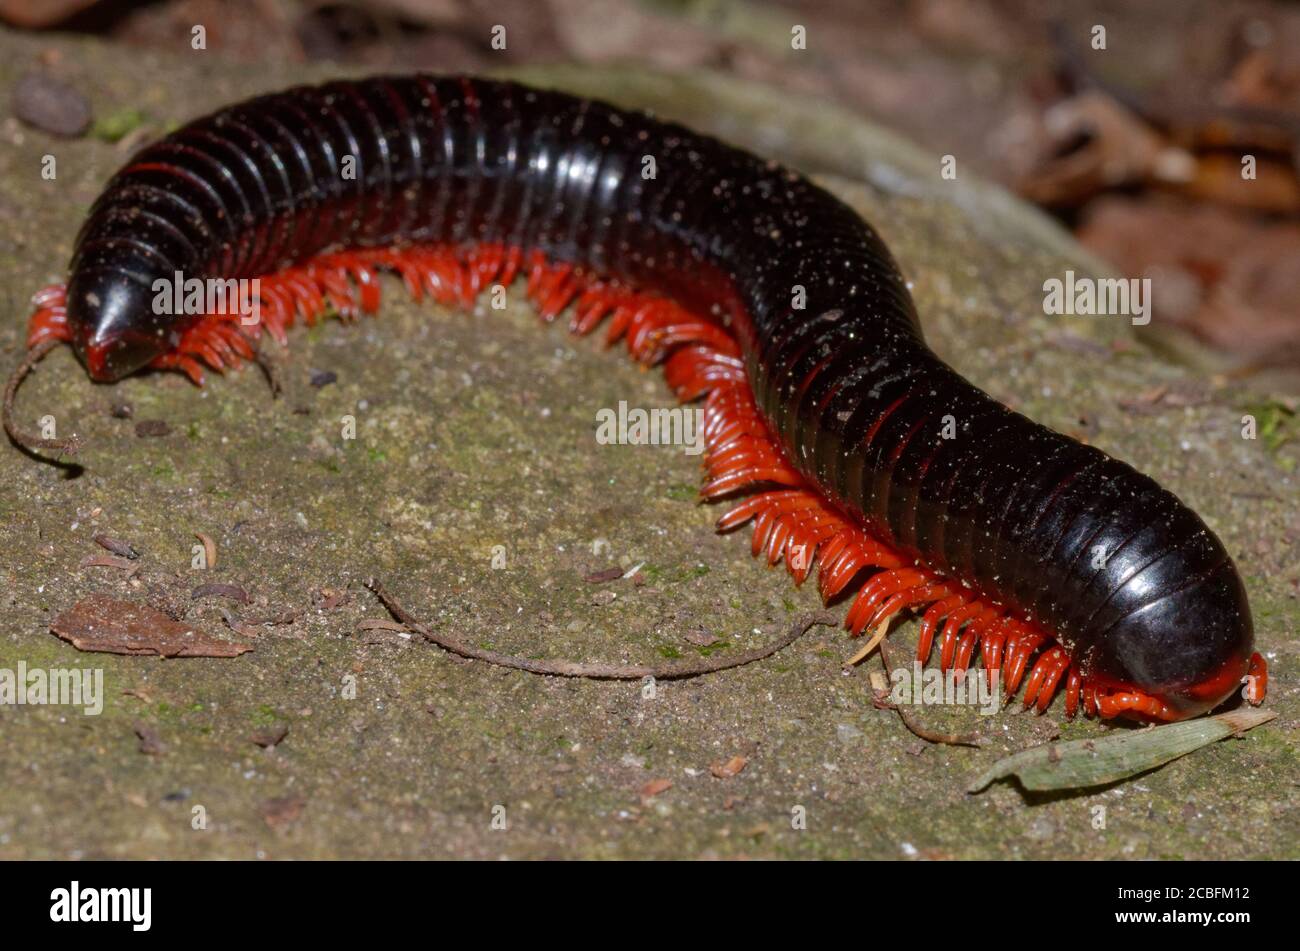 Large millipede with red legs Stock Photo